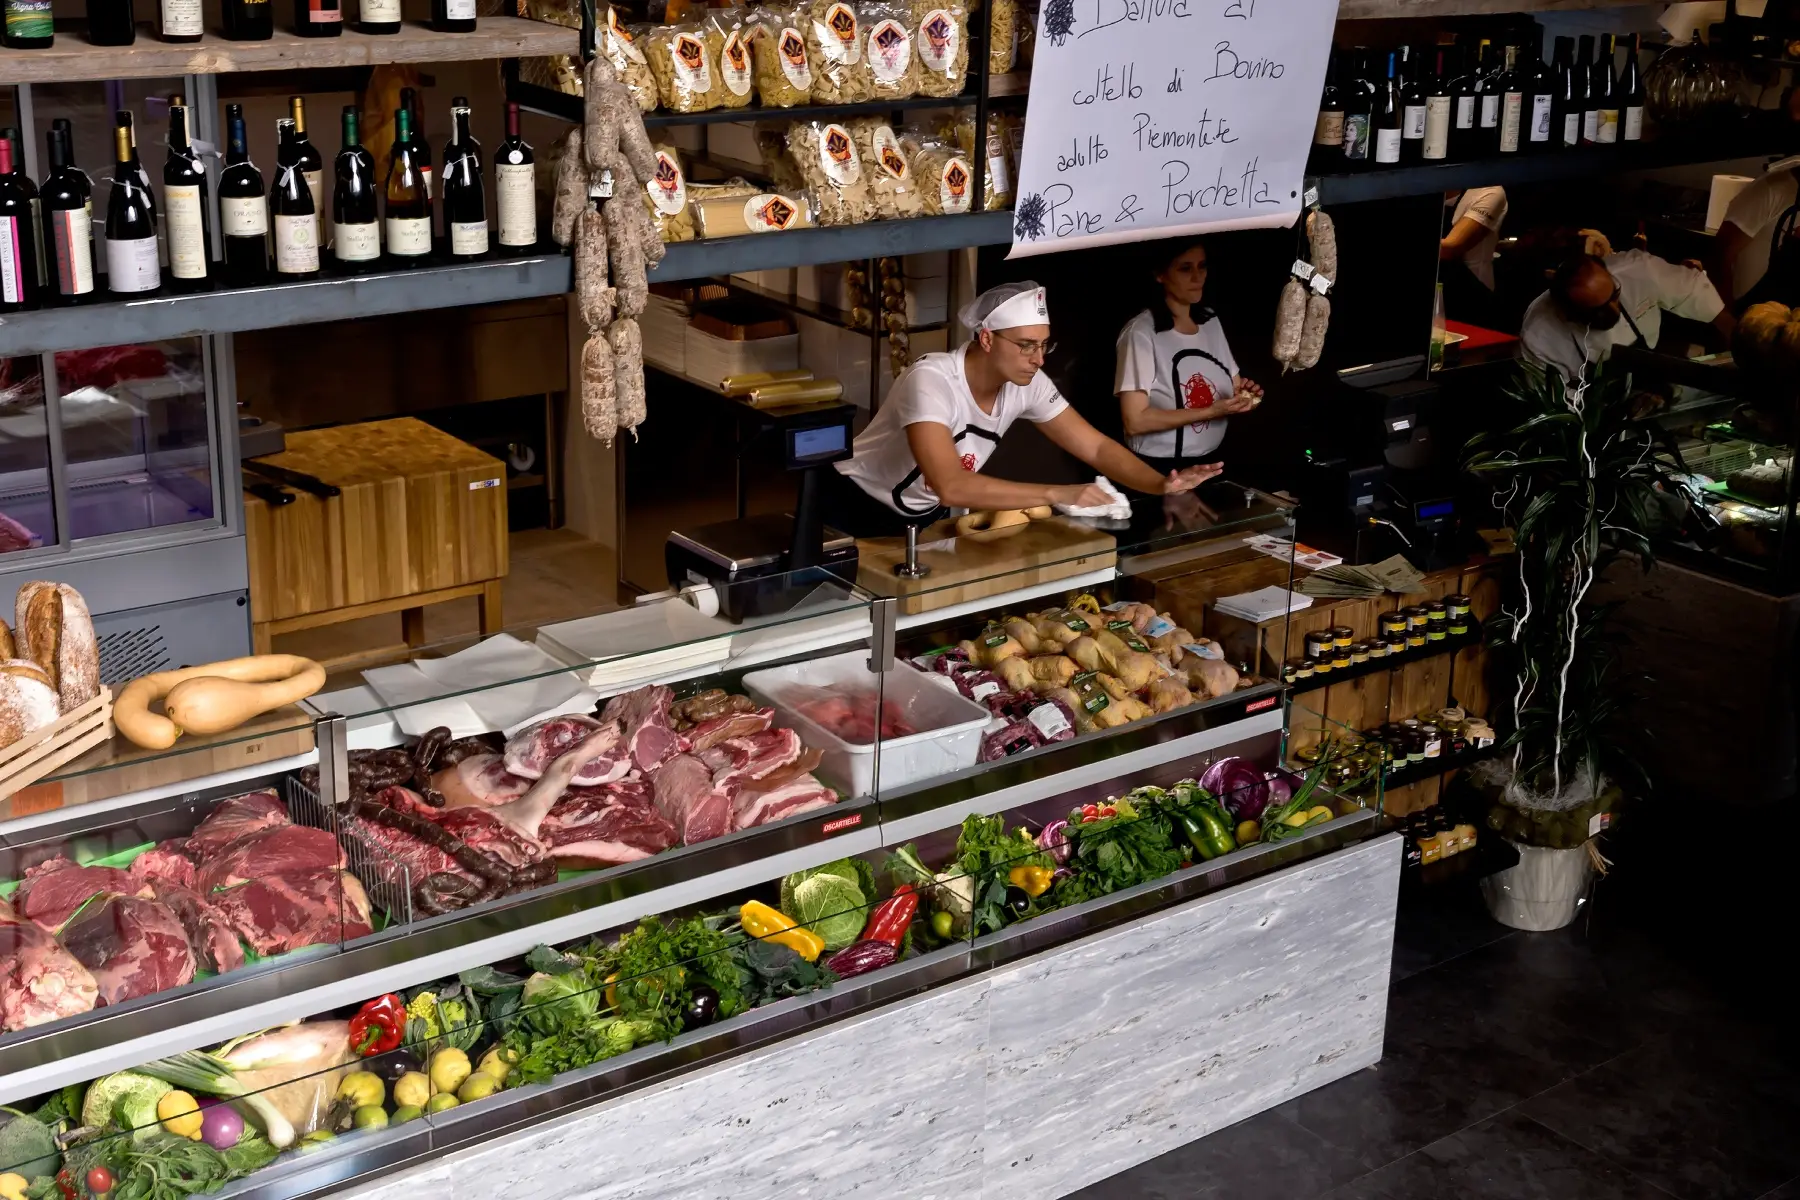 Vendor sells organic meat, fresh produce, and wine at Mercato Centrale Roma